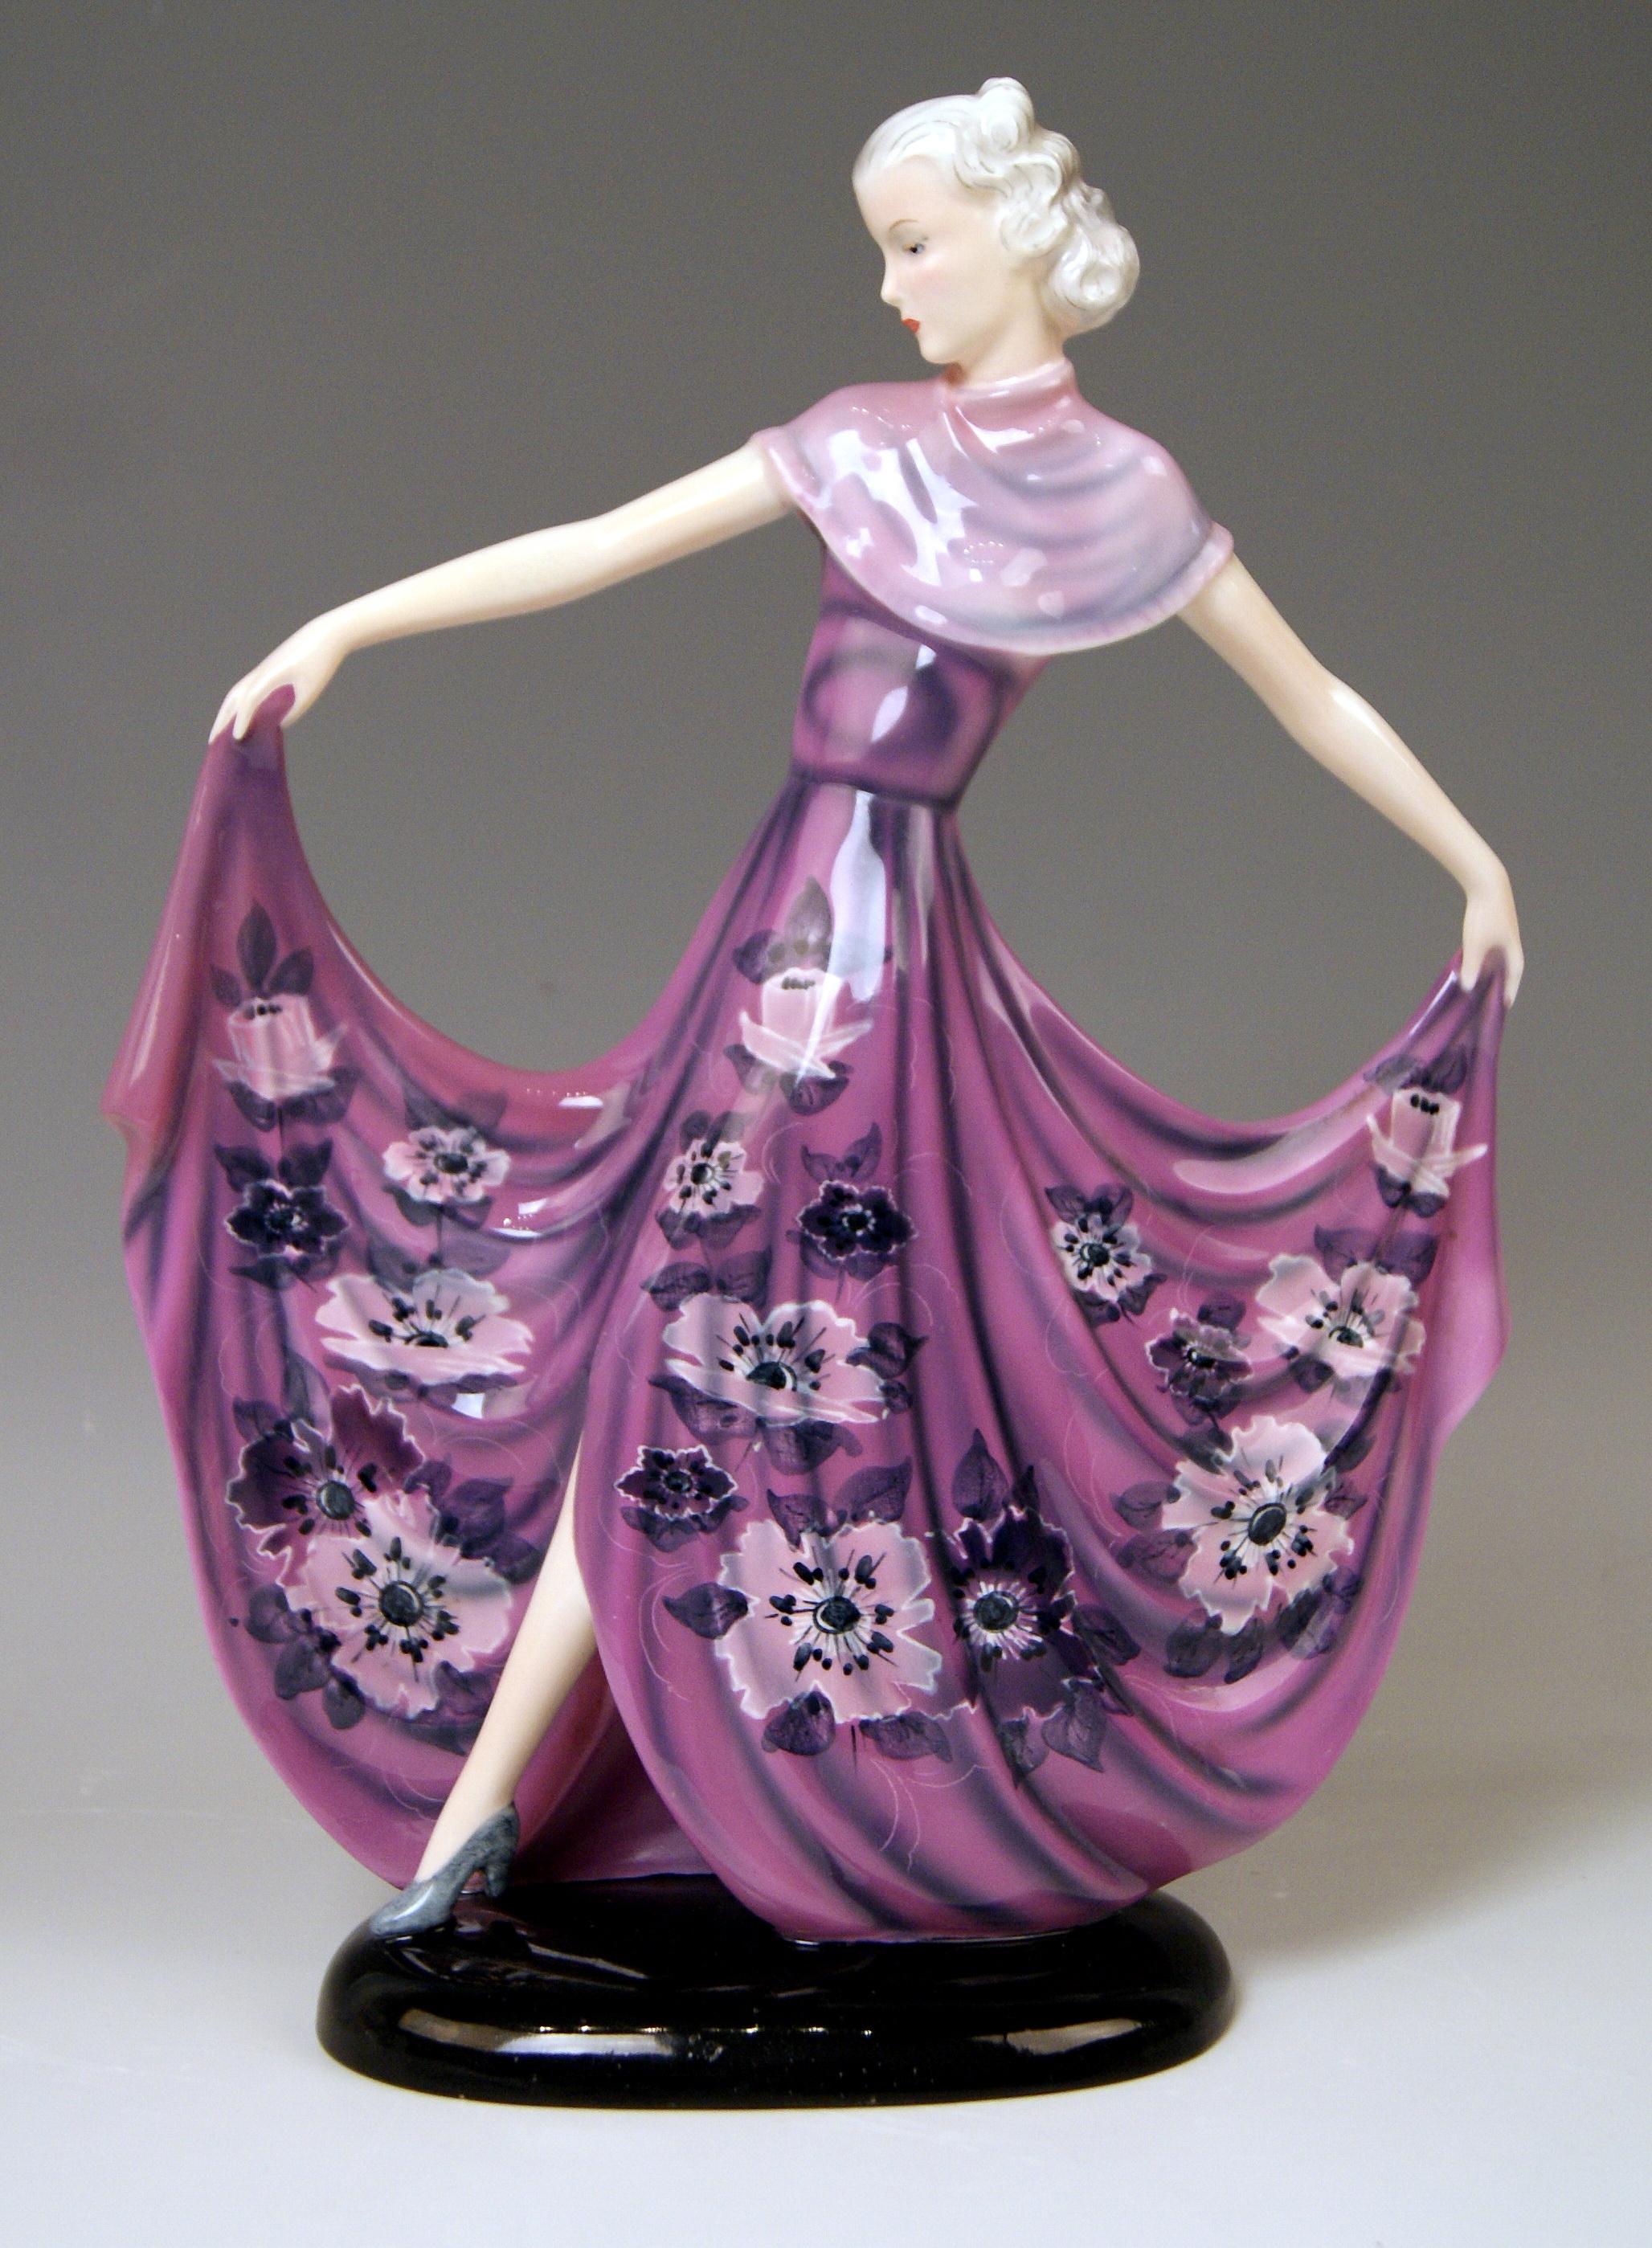 Goldscheider Vienna dancing lady wearing rarely painted dress, decorated with nicest stylized flowers' pattern: This figurine - called 